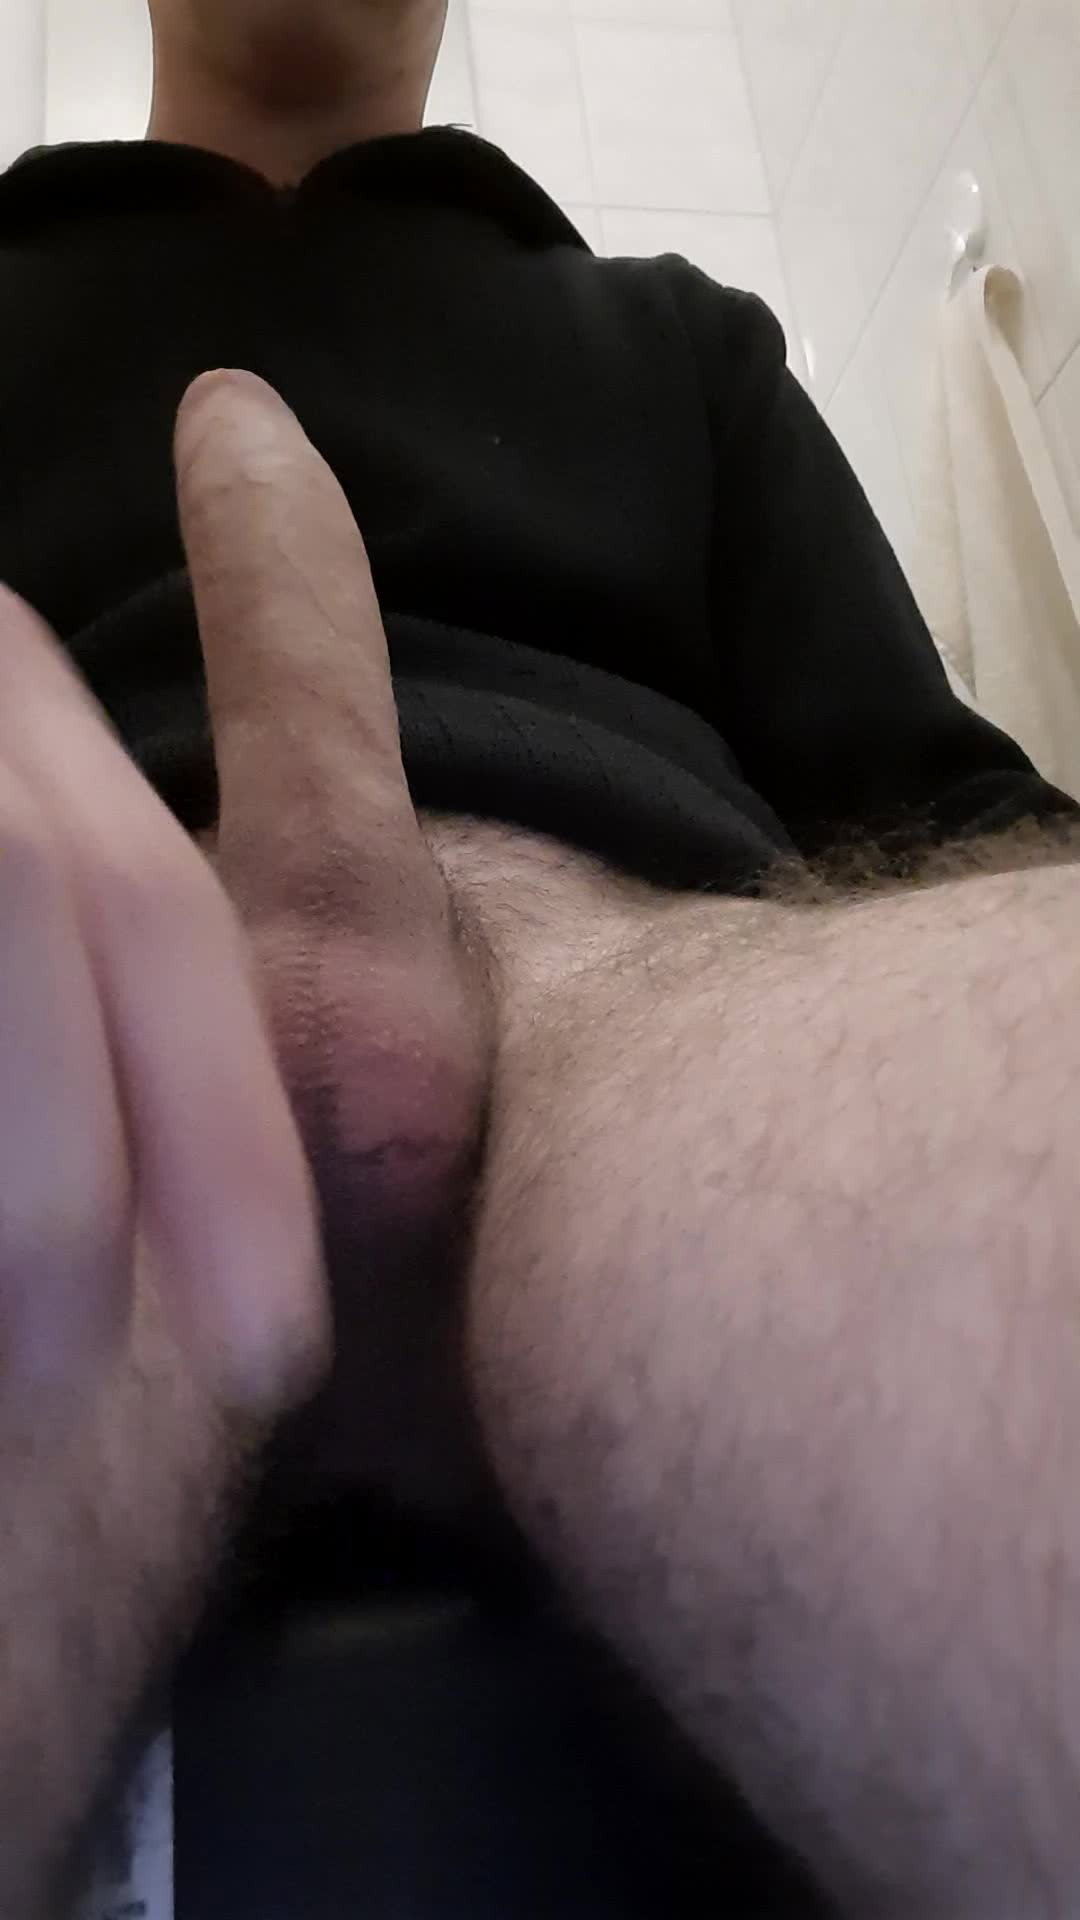 Video by Bigcock with the username @Wh1998,  February 10, 2022 at 2:44 PM. The post is about the topic Big Cock Lovers and the text says 'Nice big cock!'